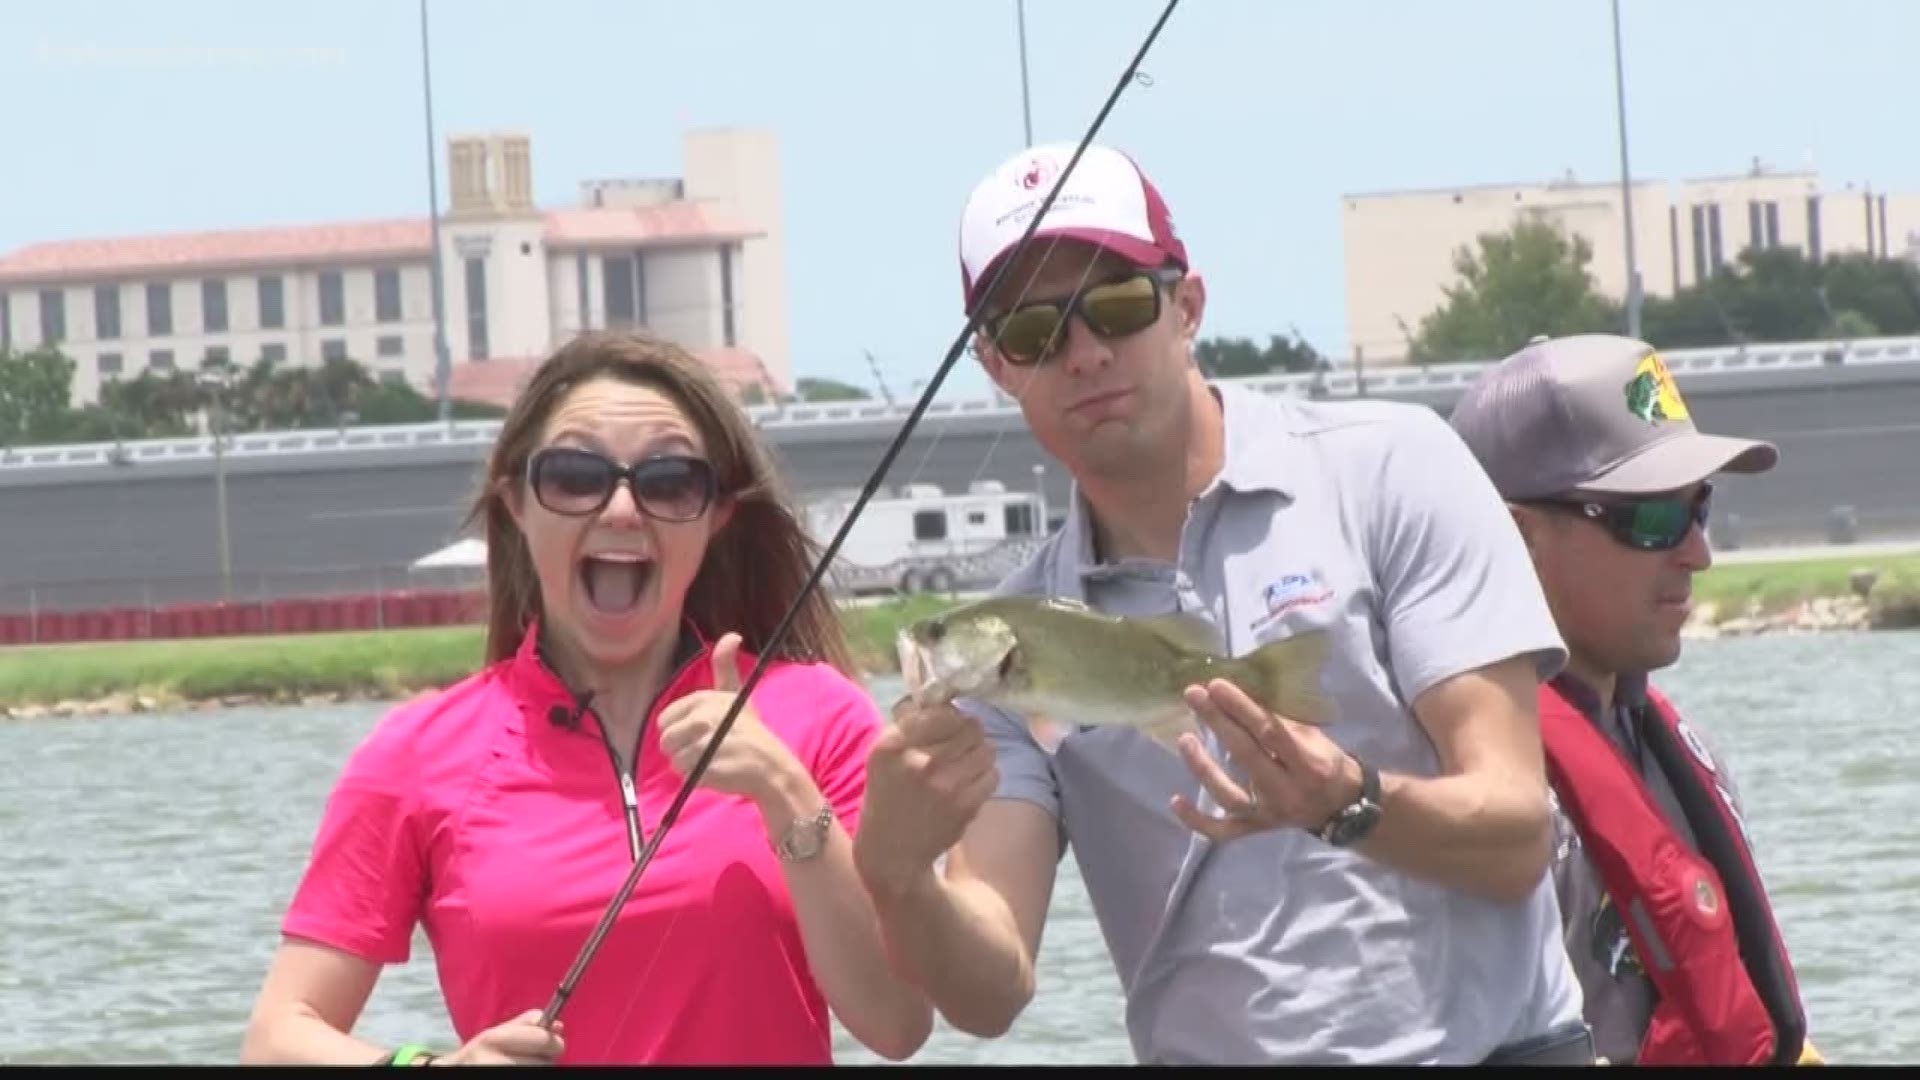 Daytona International Speedway has it's own lake, fully stocked with fish. Why? Well, because tradition.